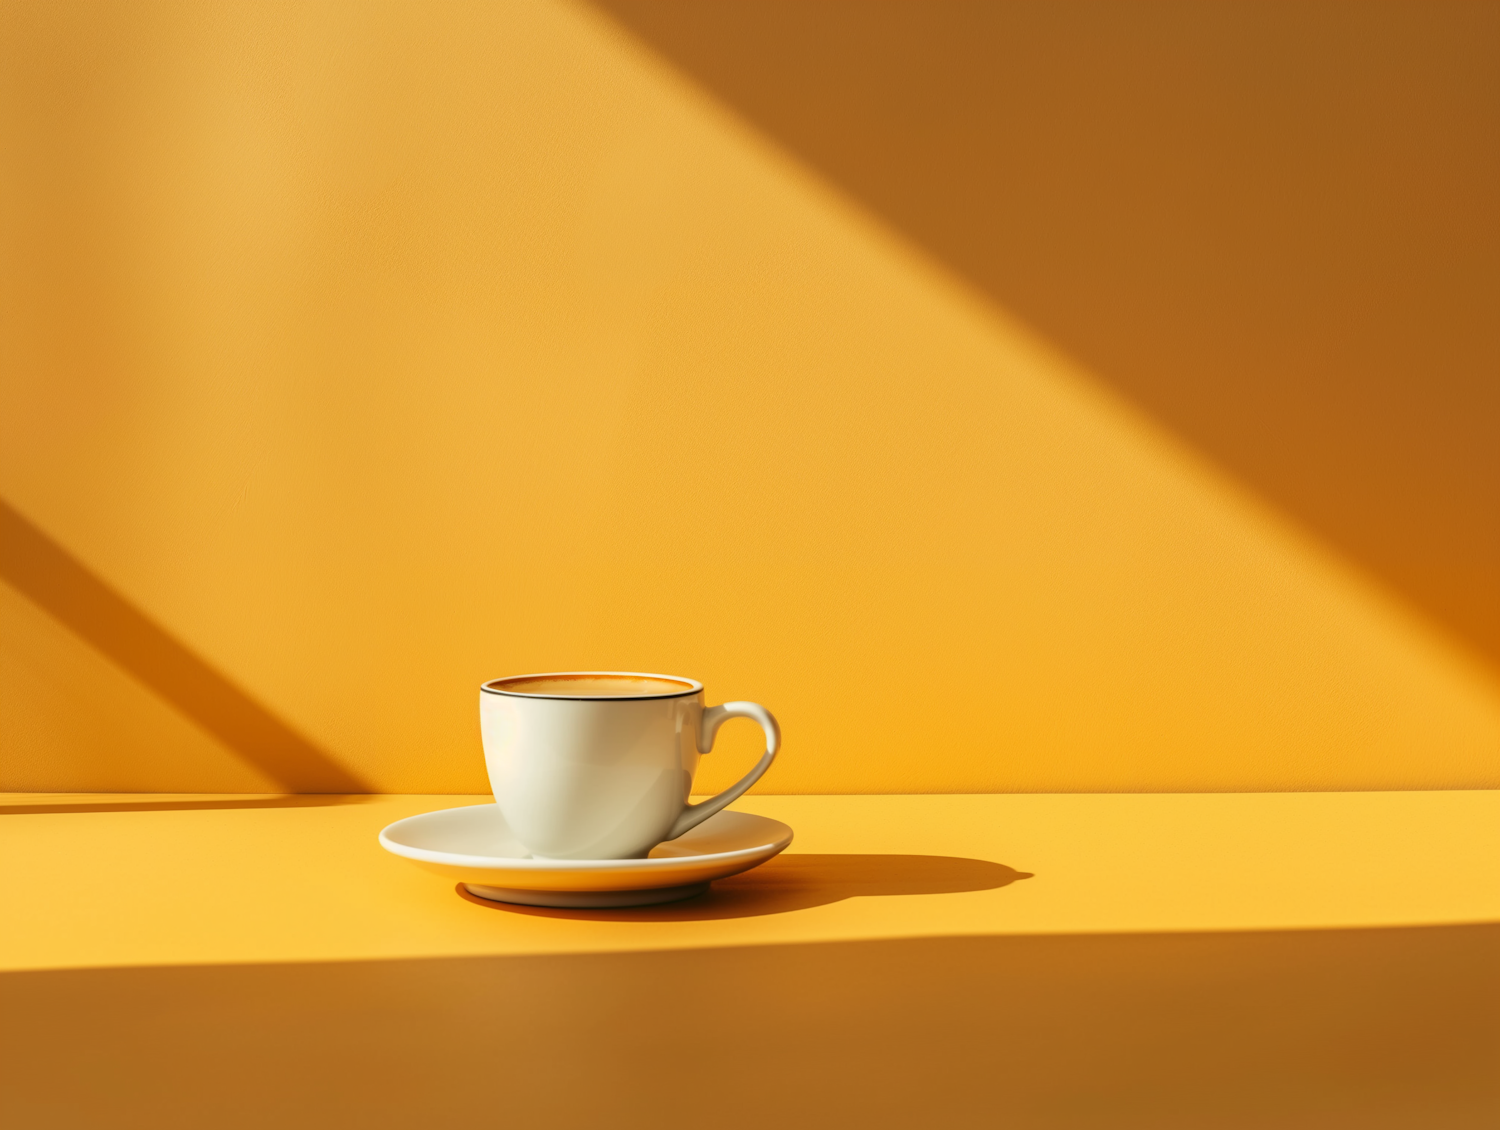 Minimalist Yellow Composition with Porcelain Cup